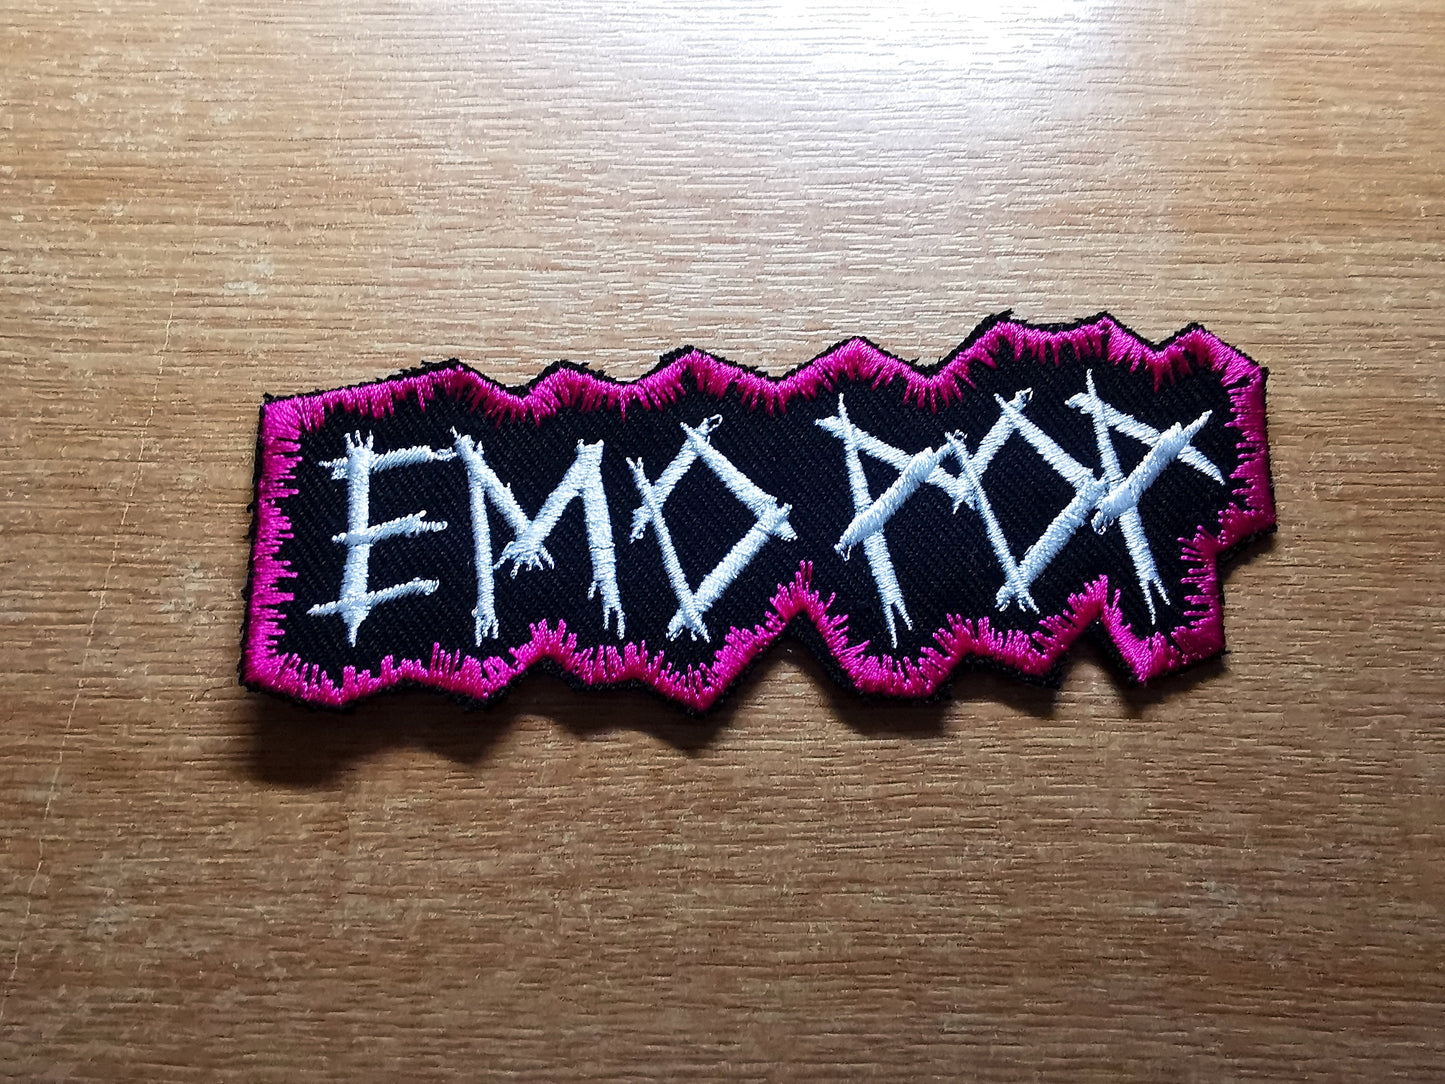 Emo Pop Embroidered Patch Pop Punk Metalcore 00s Culture Throwback